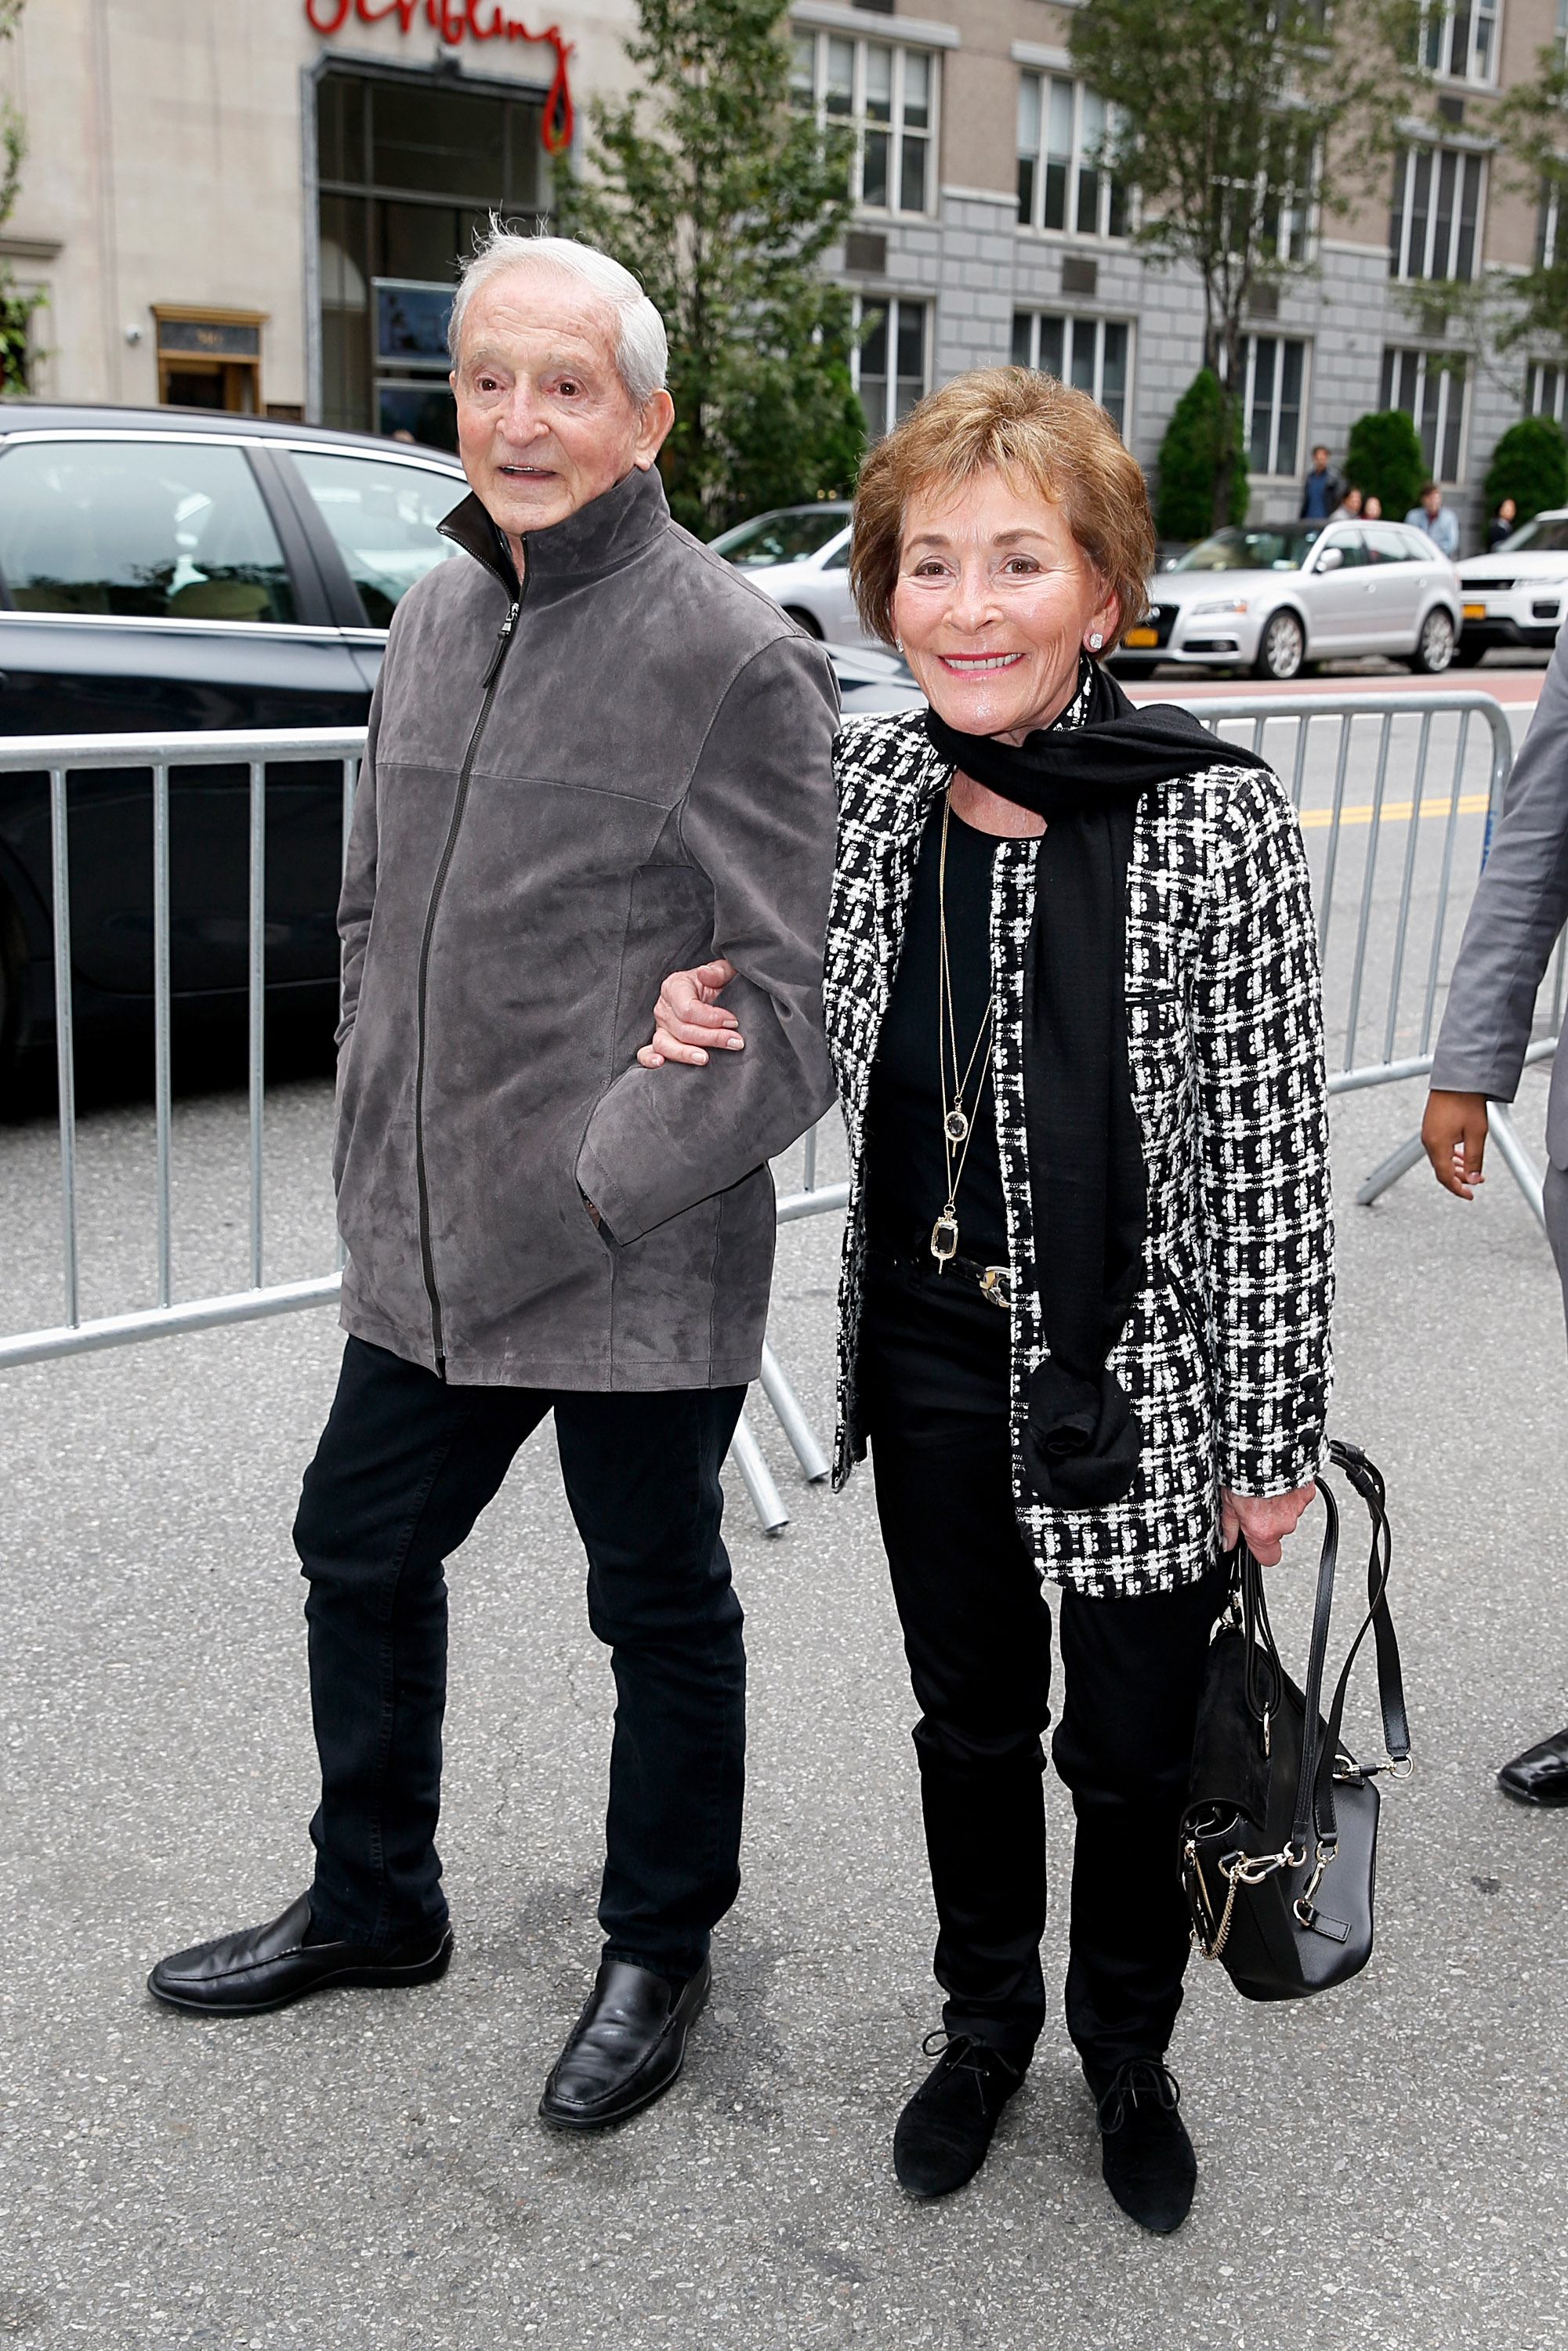 Judge Judy Sheindlin and husband Jerry Sheindlin on October 14, 2018, in New York City | Source: Getty Images